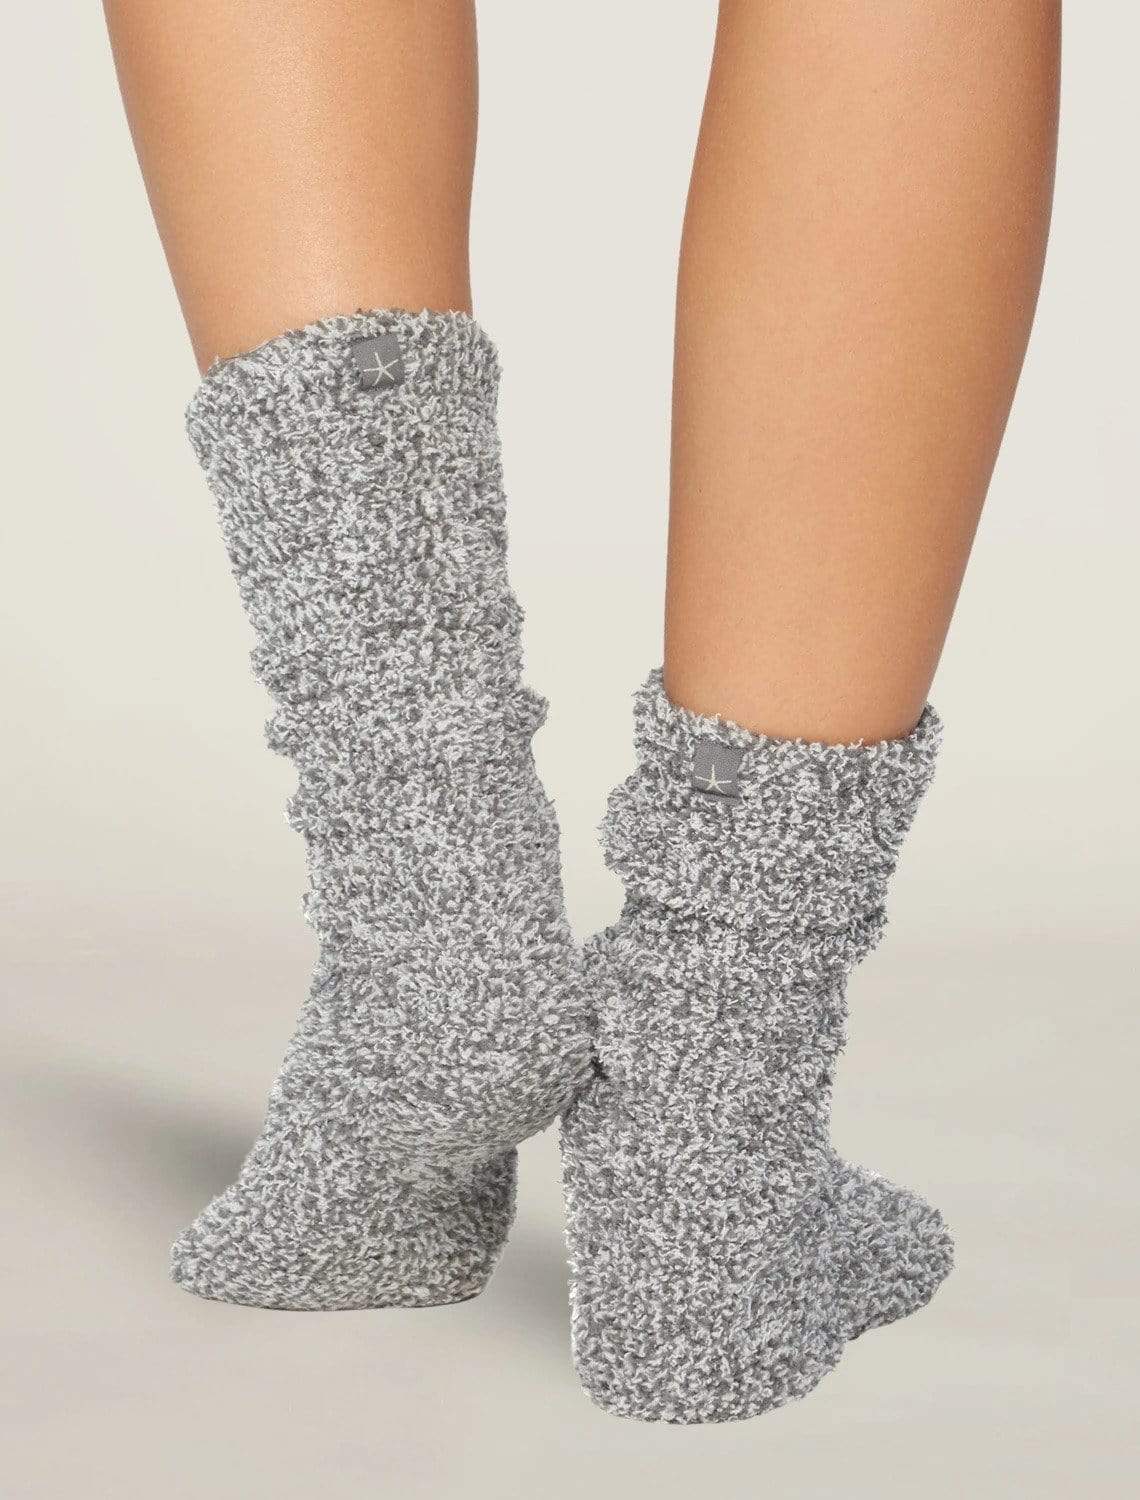 BAREFOOT DREAMS THE COZYCHIC HEATHERED WOMEN'S